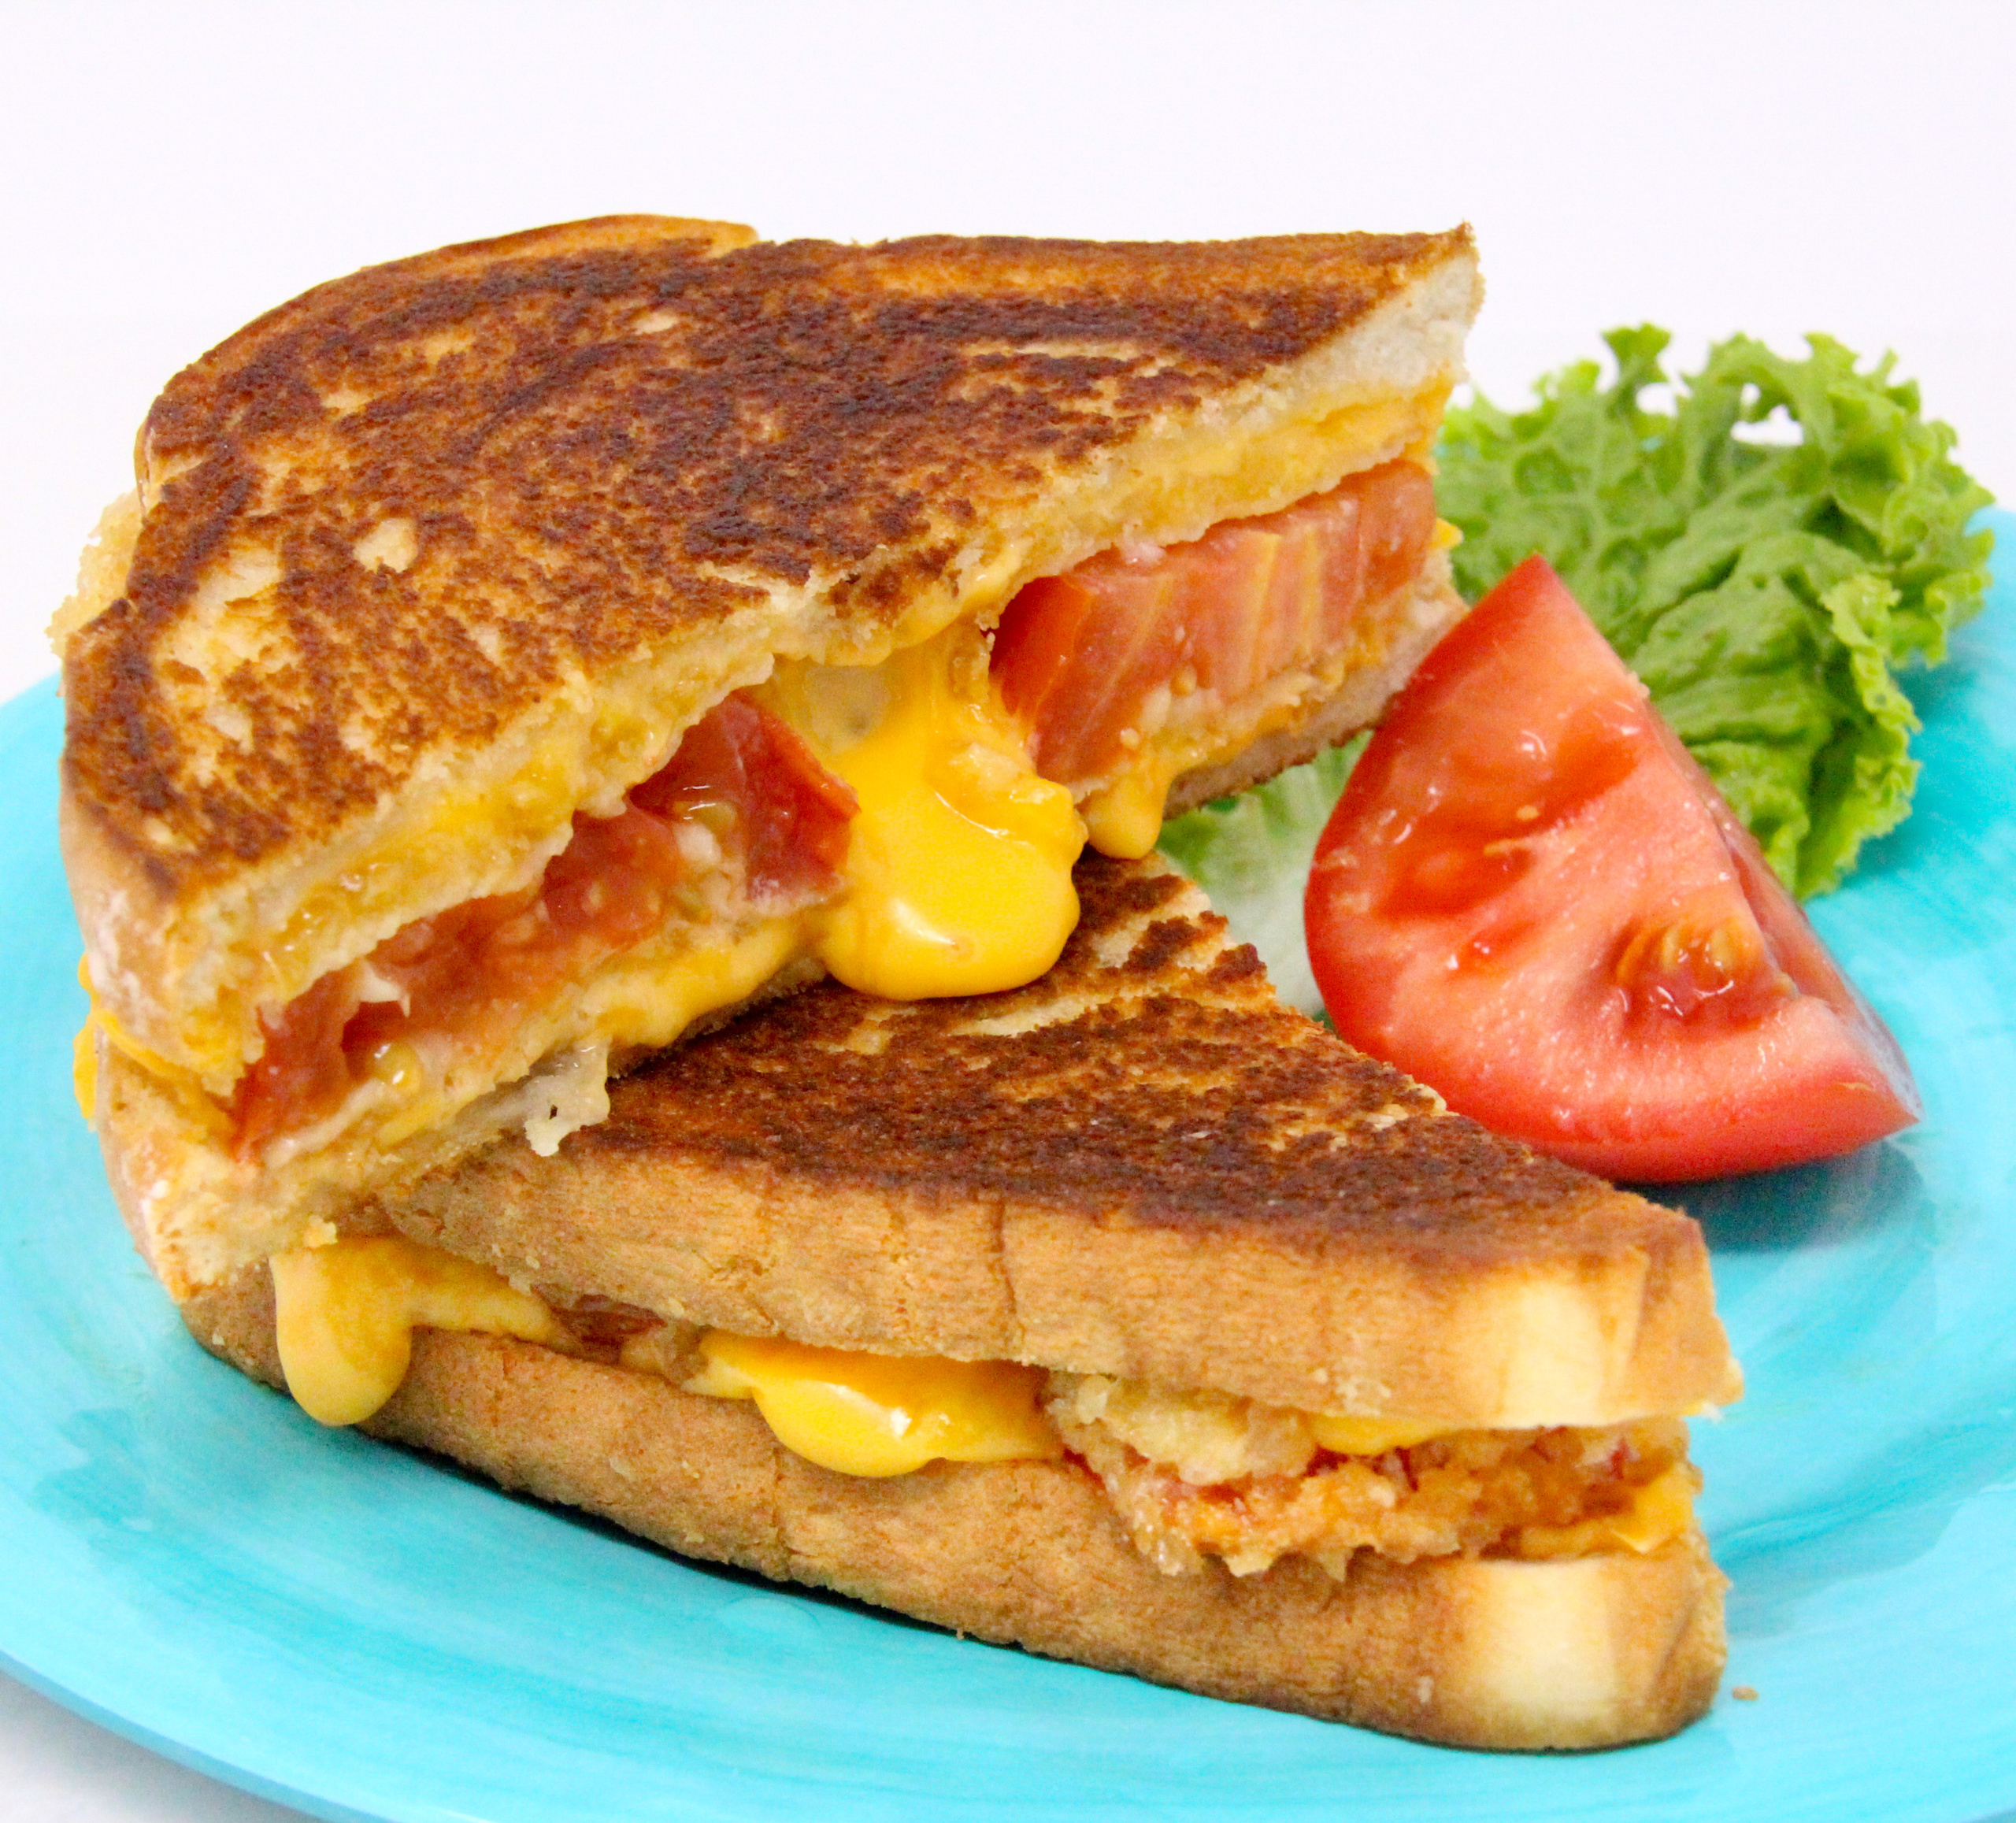 Alvin’s Panko Perfection grilled cheese sandwich features sun-ripened tomatoes coated with crunchy panko, tangy Parmesan, and oozing, melted sharp cheddar cheese. Recipe shared with permission granted by Linda Reilly, author of NO PARM NO FOUL.